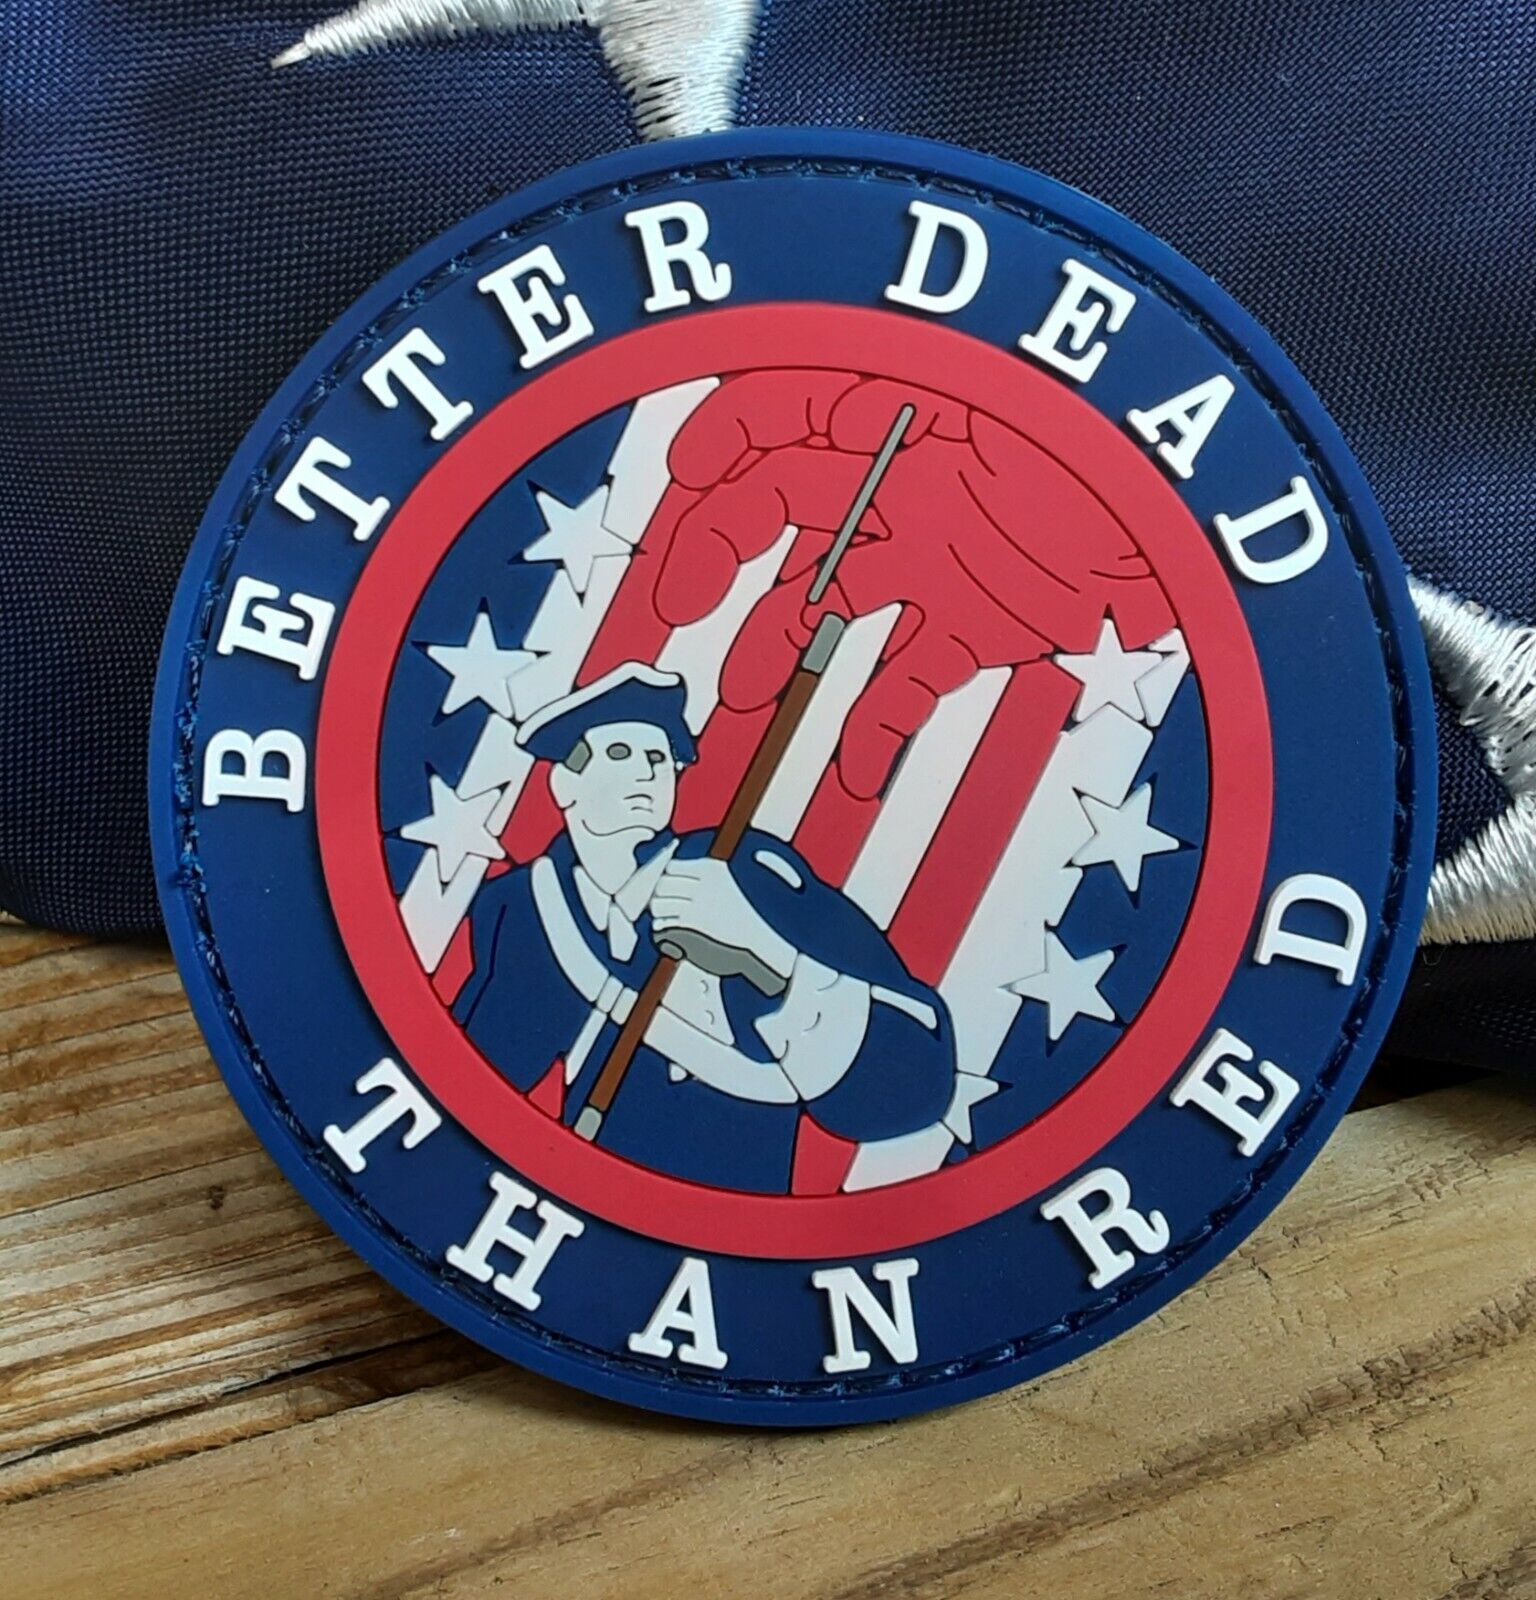 Better Dead than Red 1950s hooked back tactical morale patch